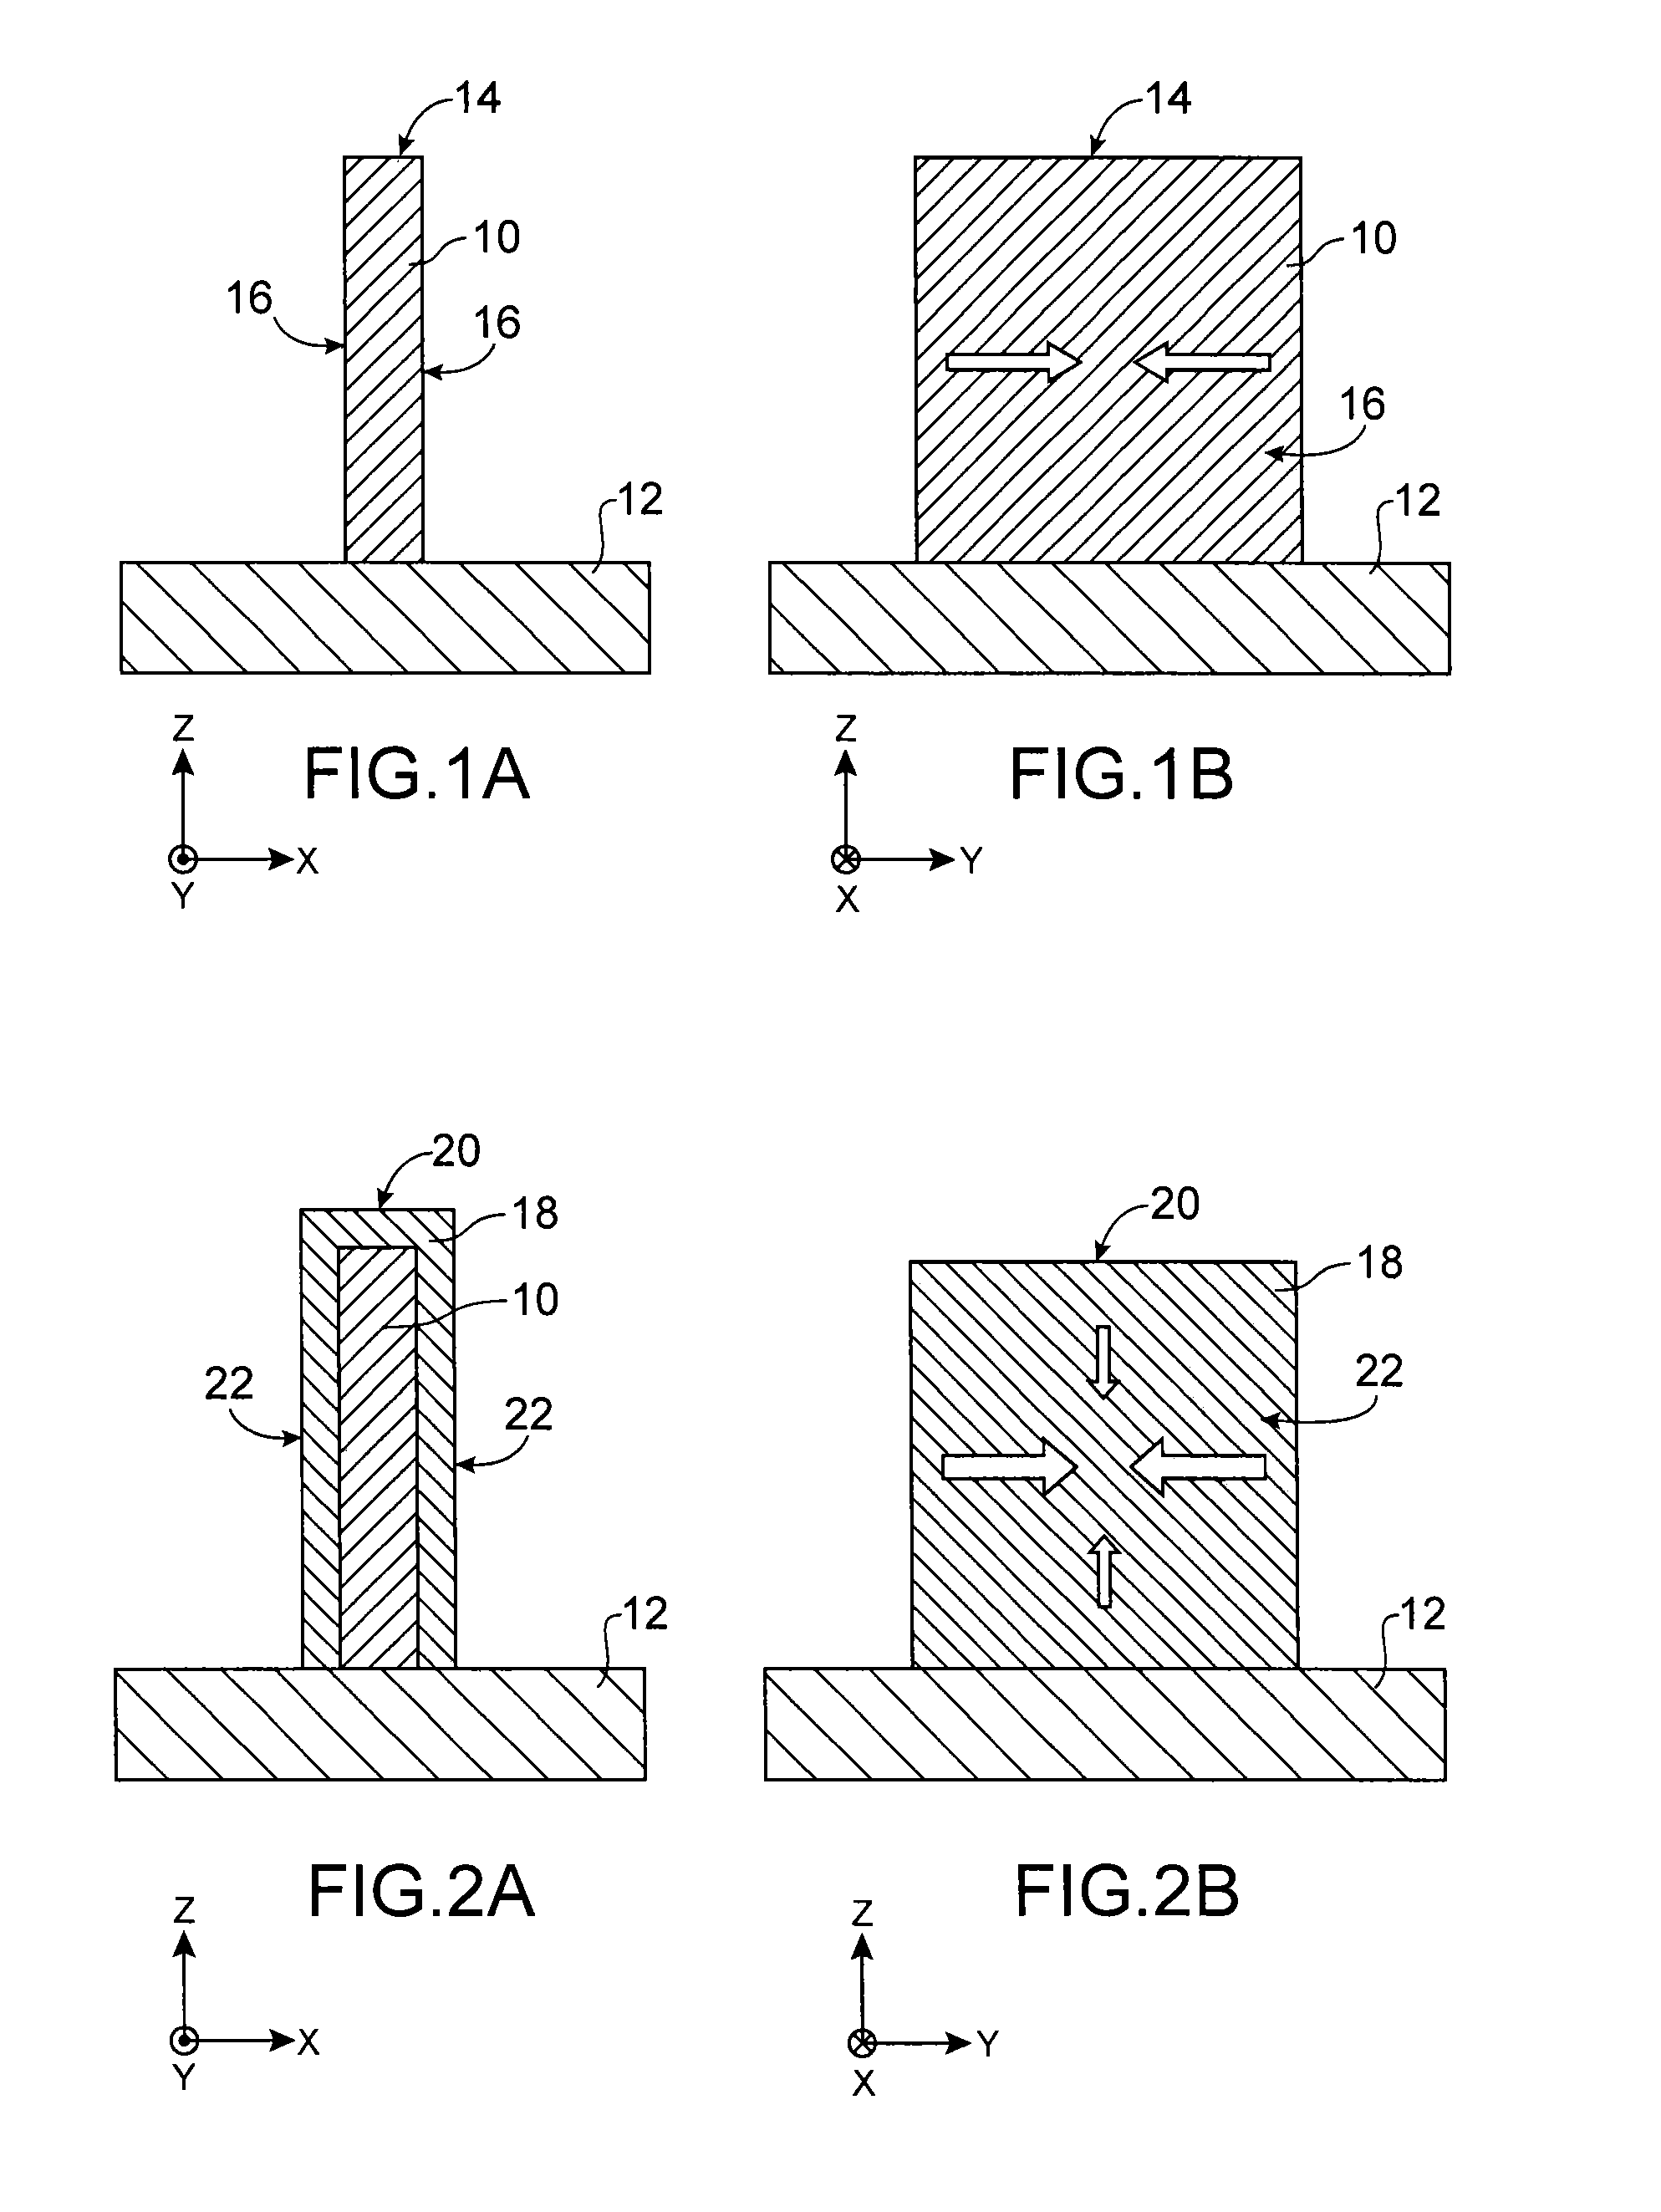 FinFET transistor comprising portions of SiGe with a crystal orientation [111]